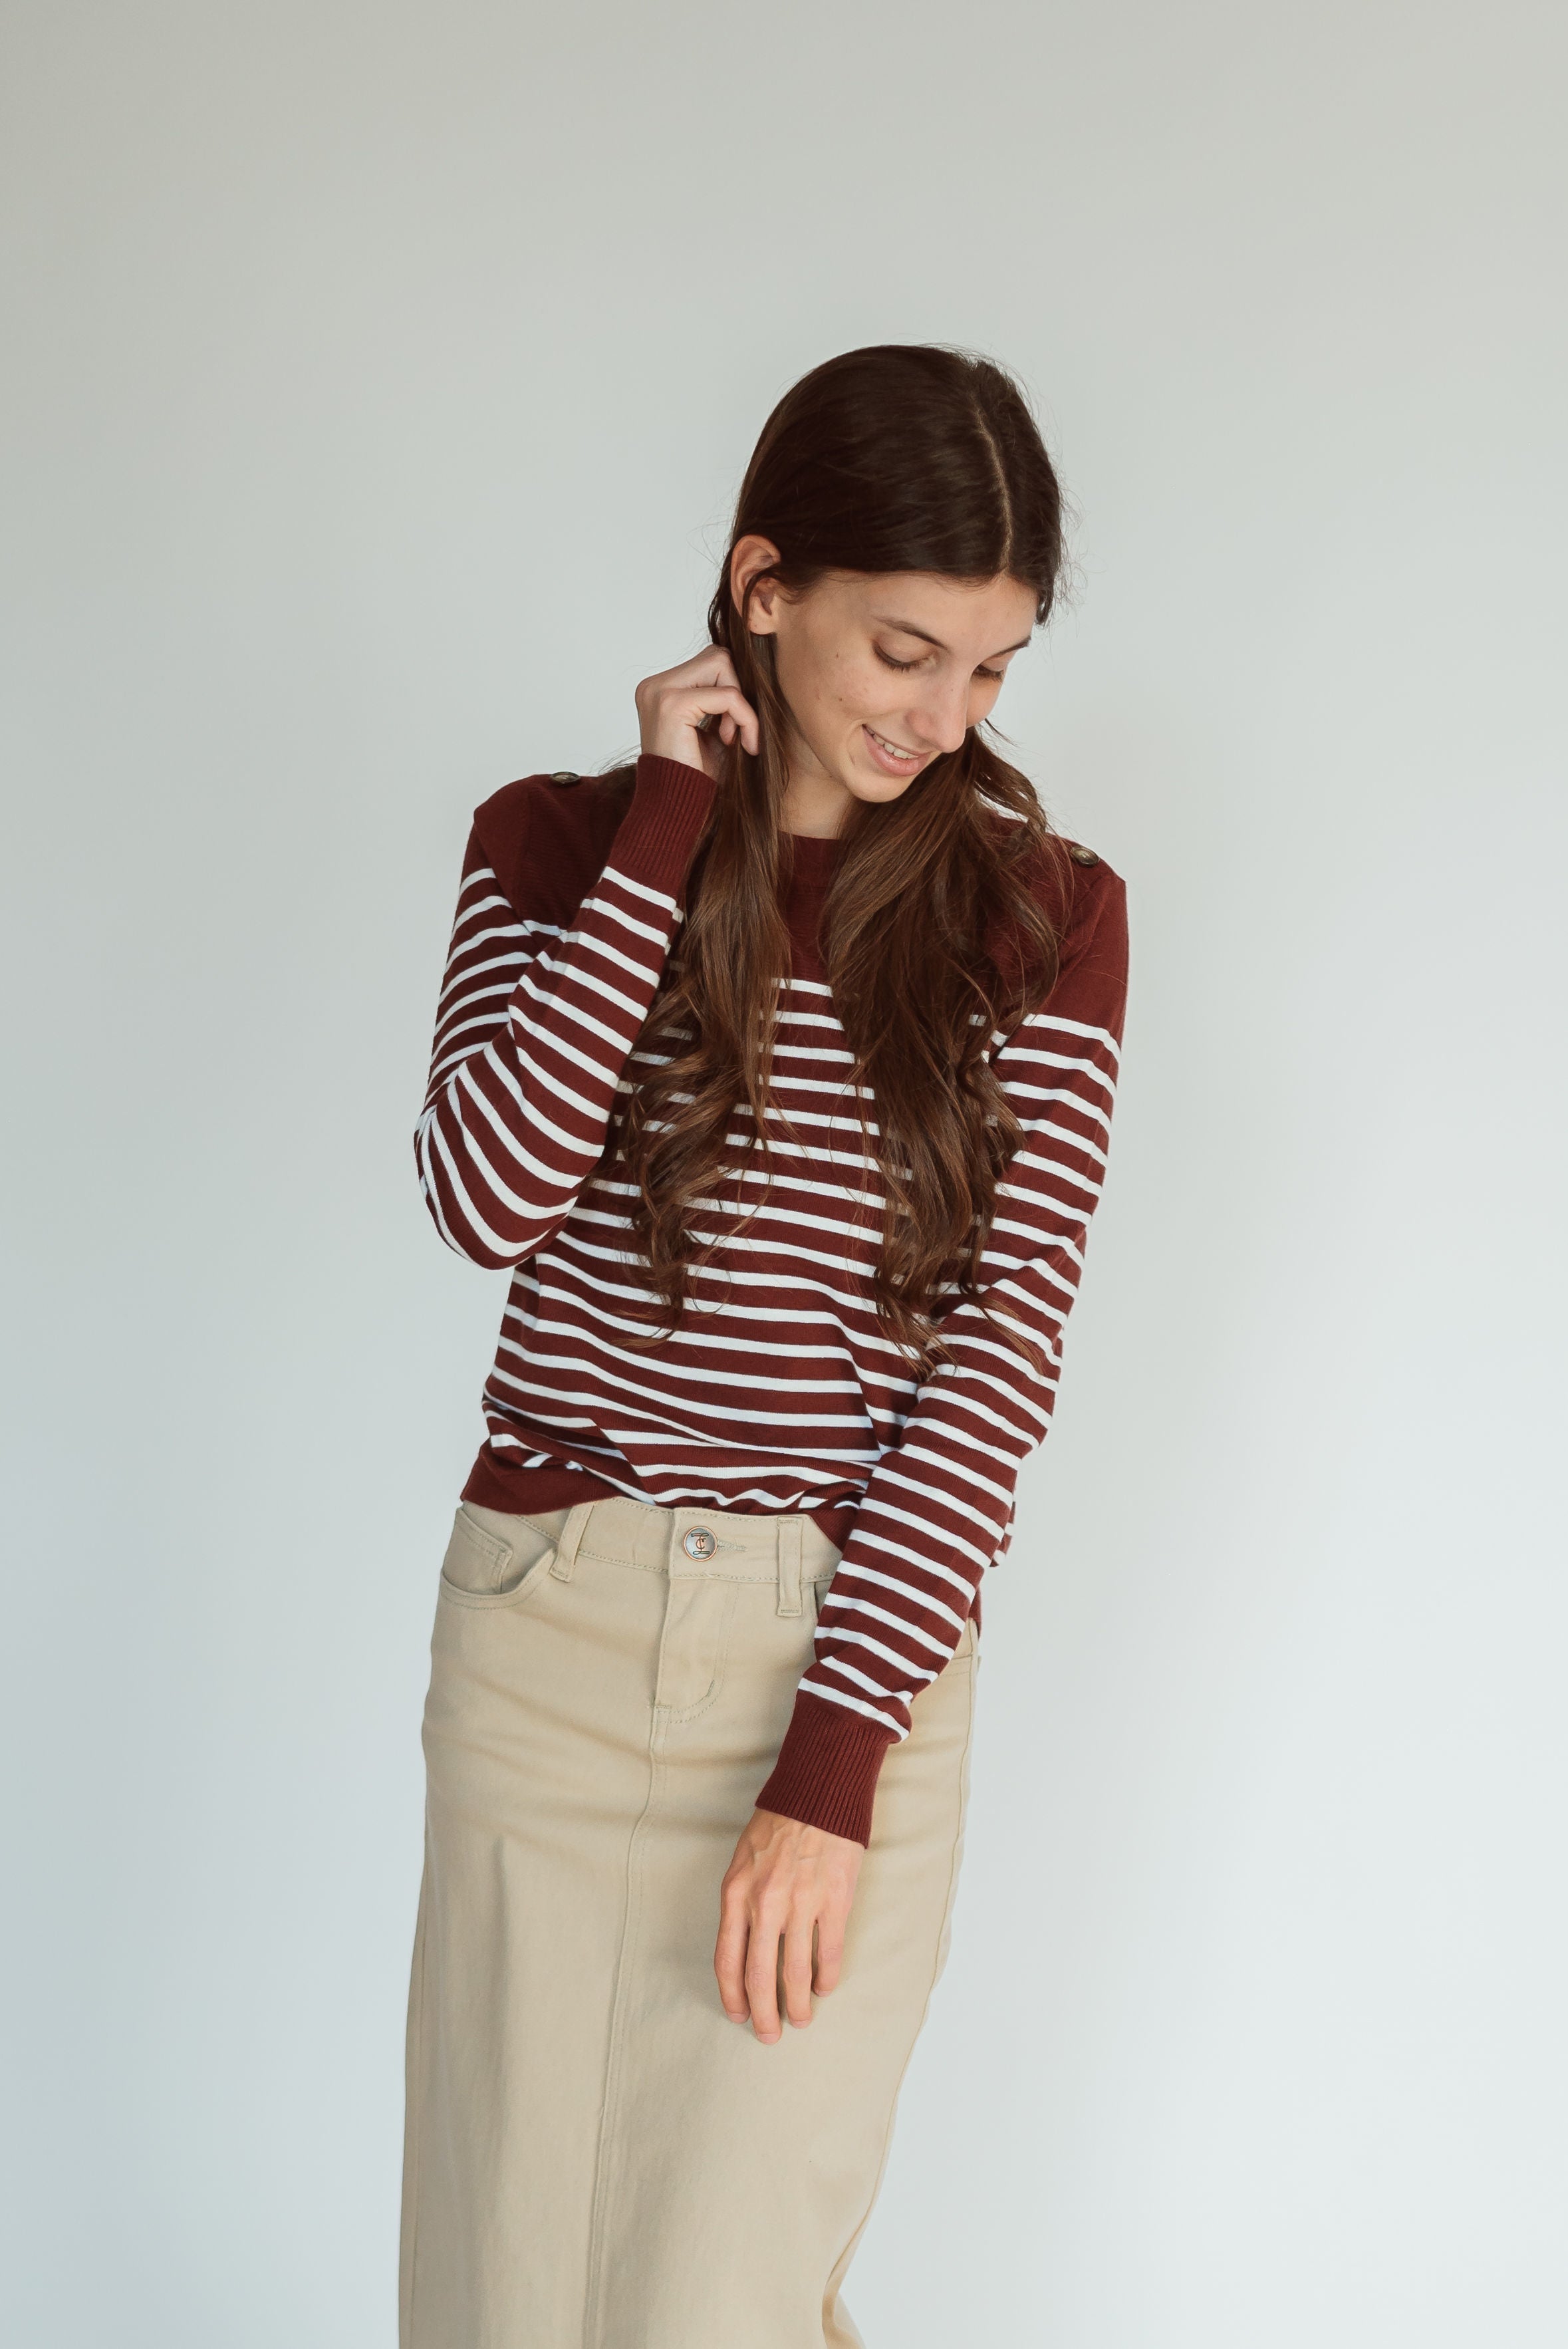 Susan Sweater in Burgundy and Ivory Stripes